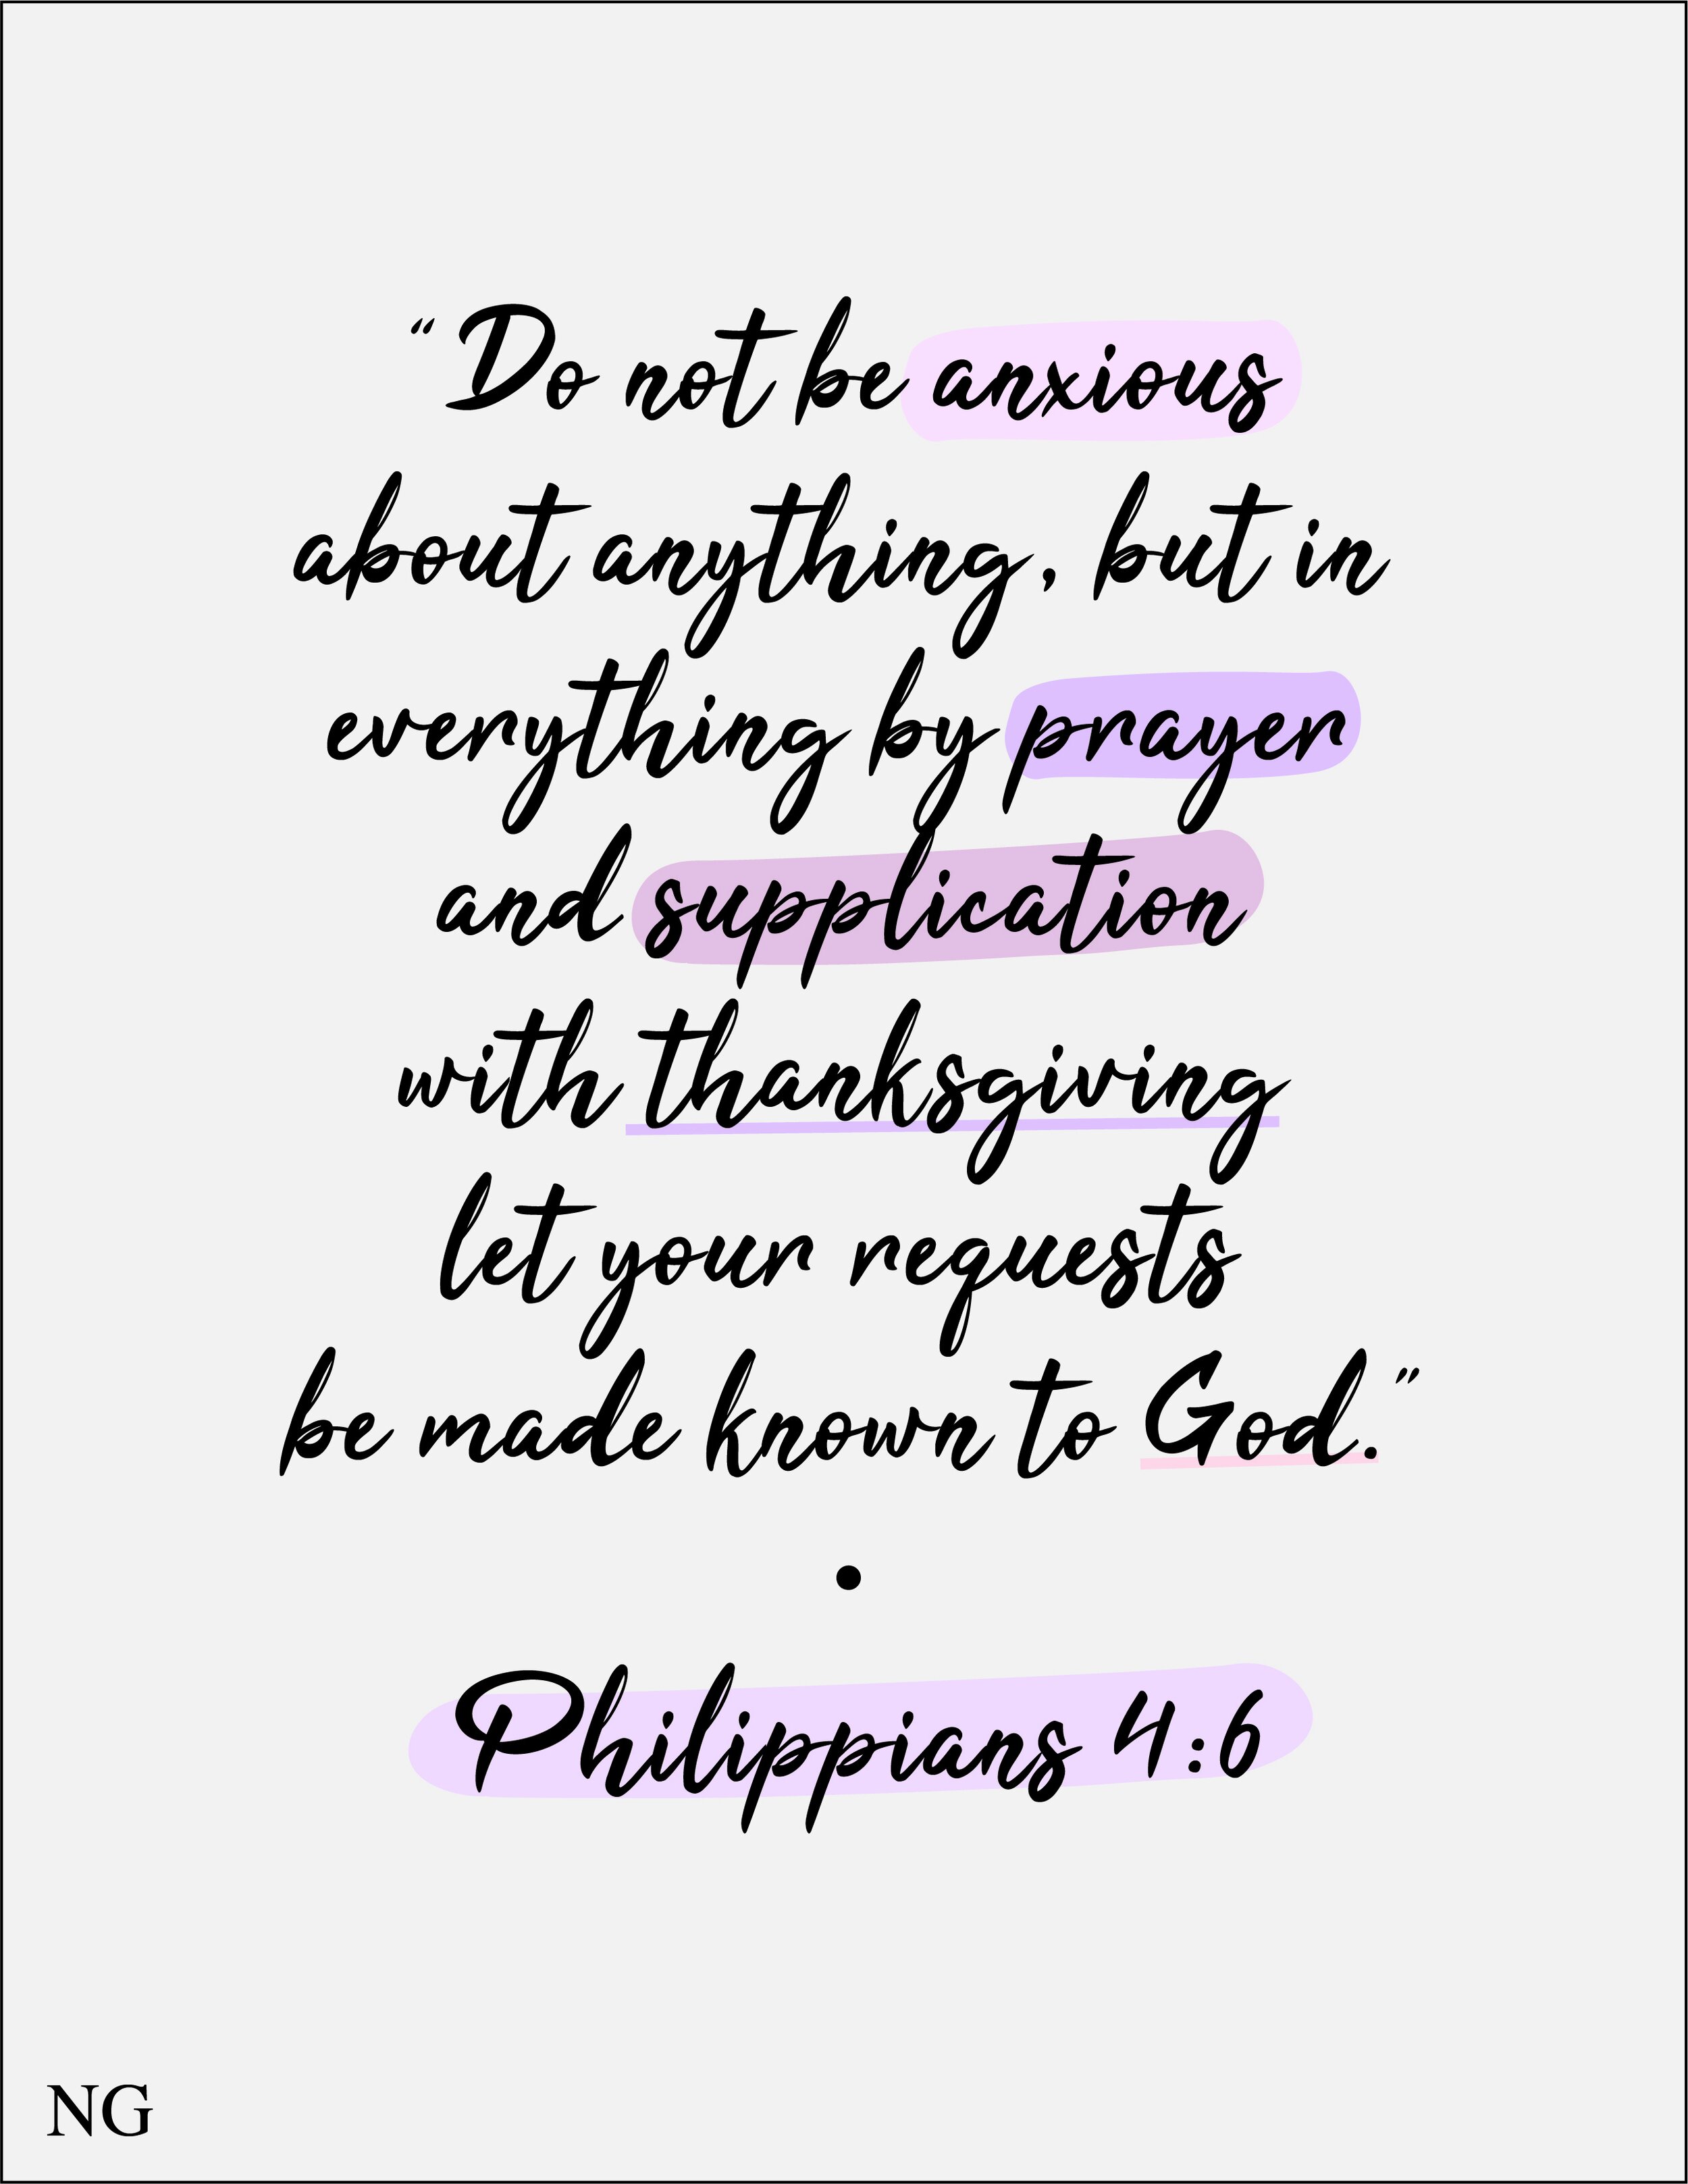 This weeks verse is Philippians 4:6: Do not be anxious for anything, but in everything by prayer and supplication with thanksgiving let your requests be made known to God.